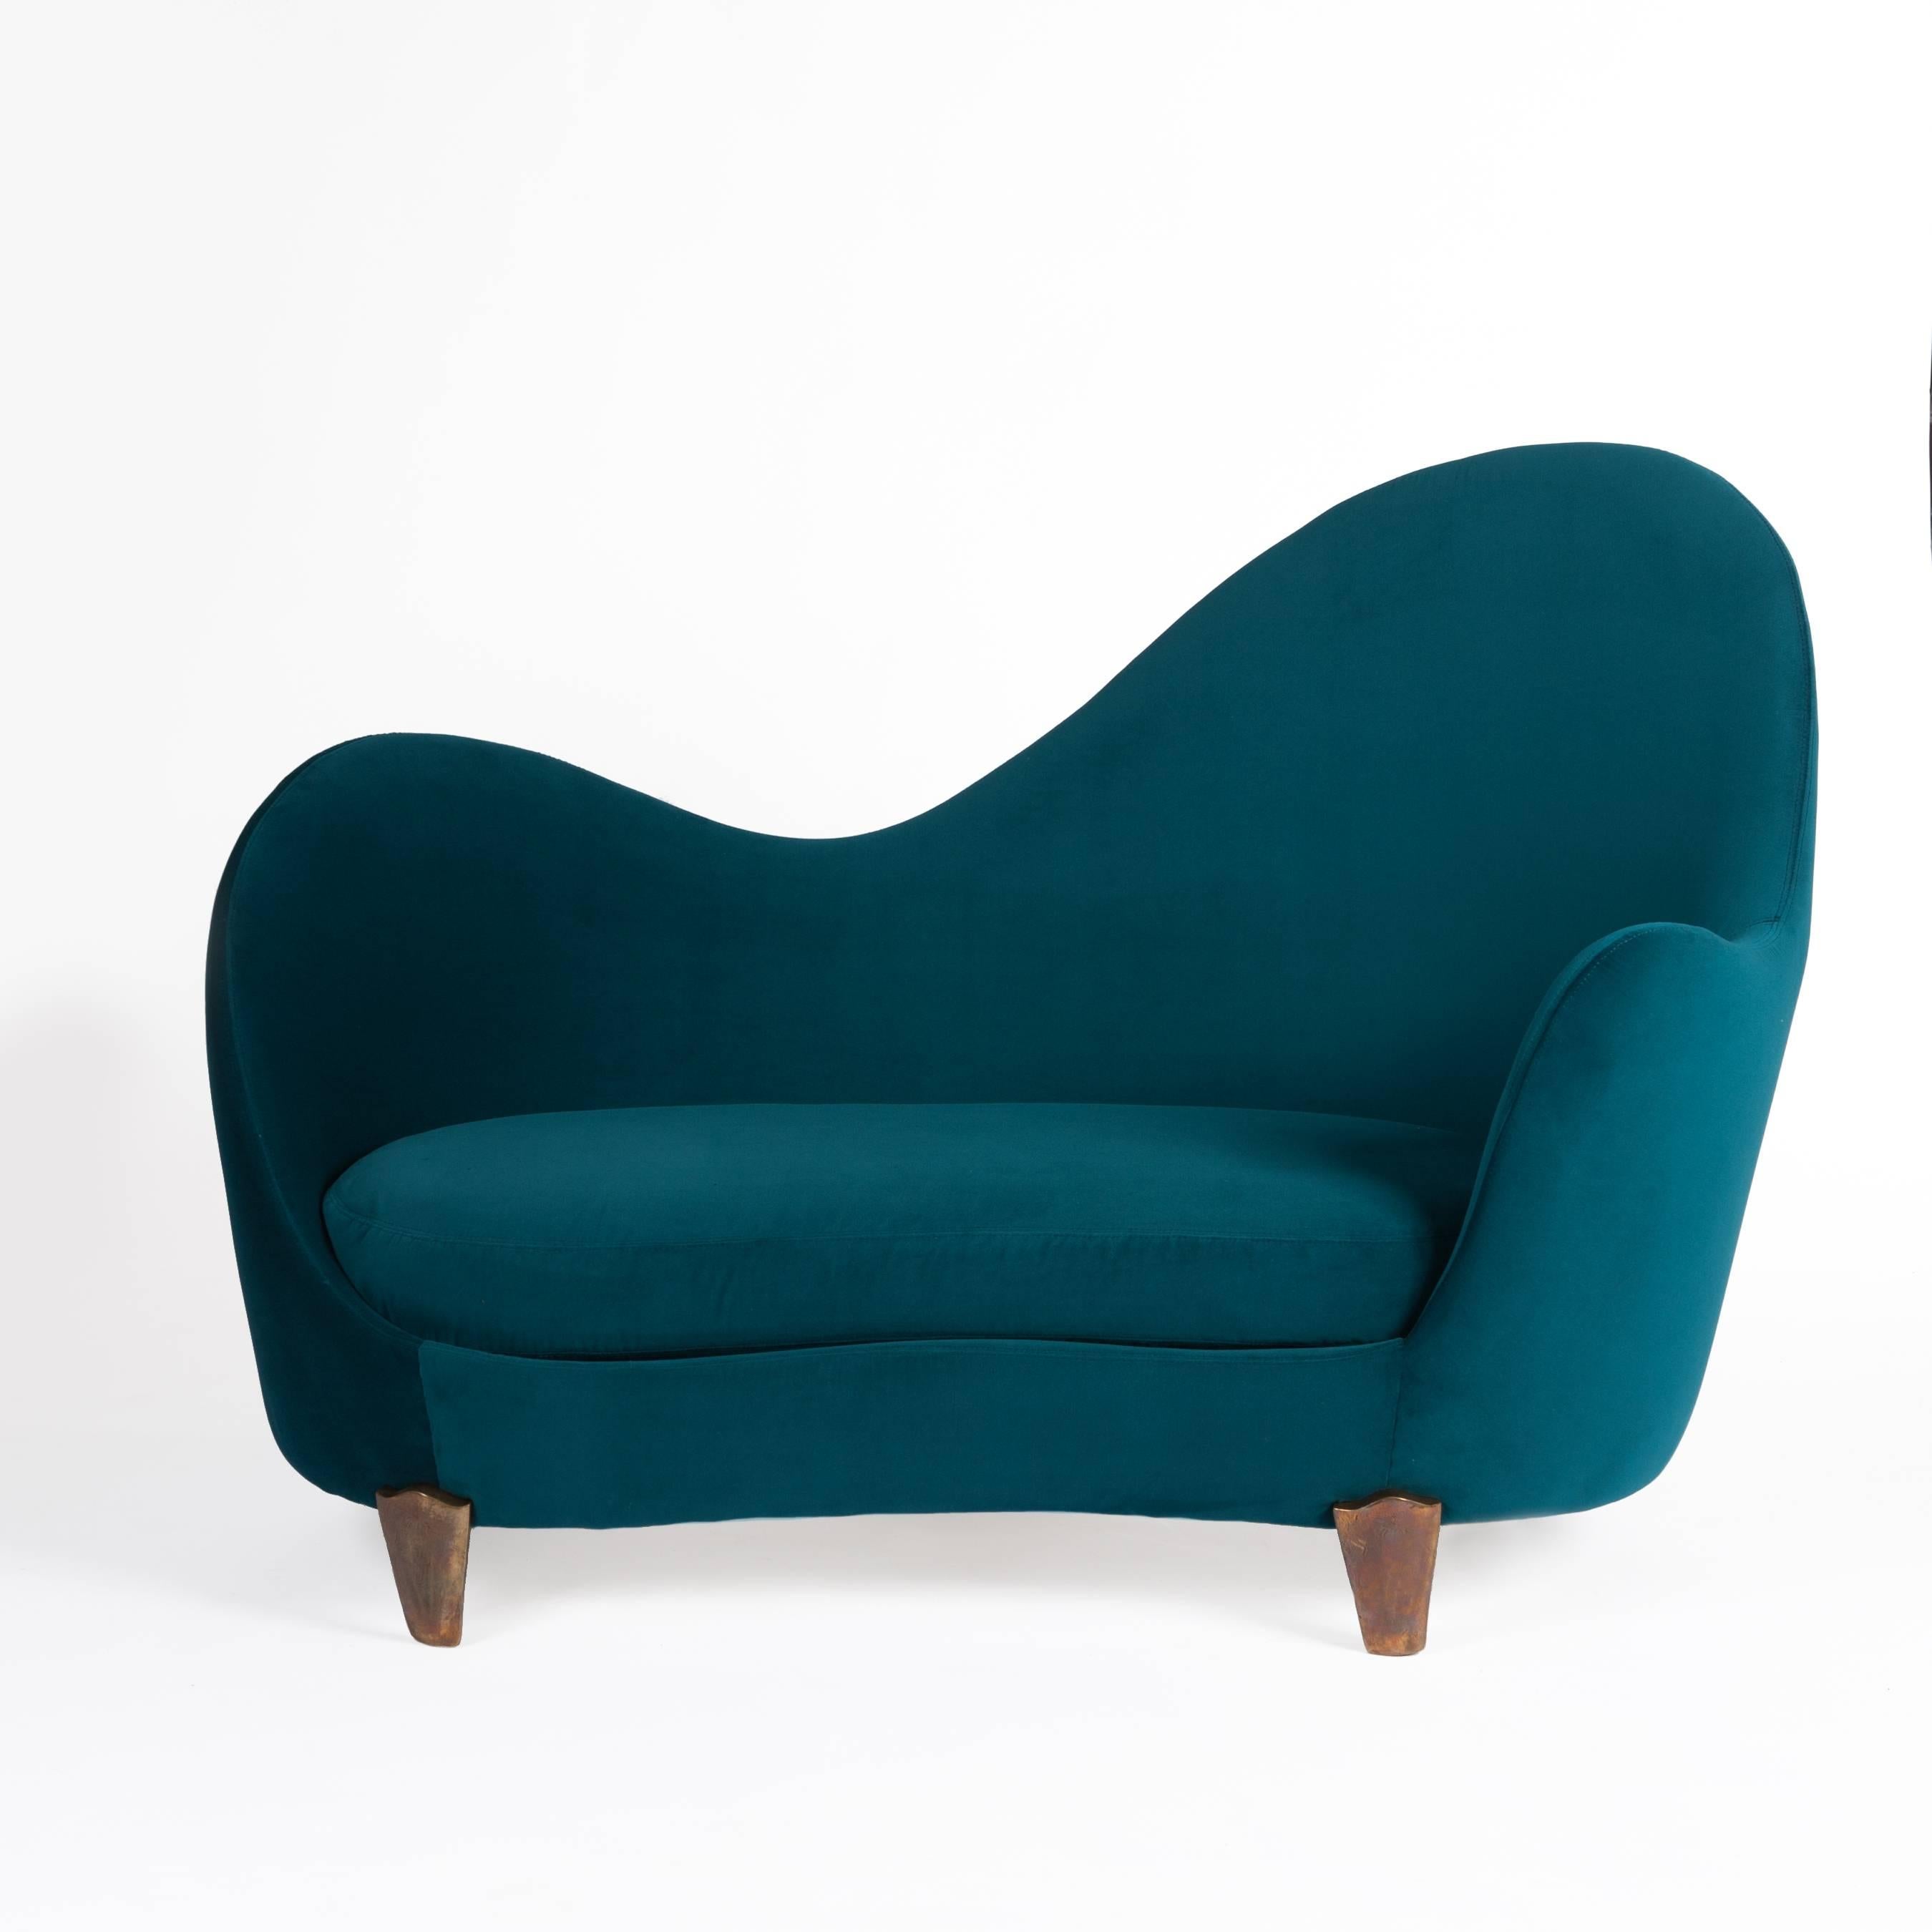 Famous sofa by Garouste & Bonetti with a wavy back and bronze feet
covered with a new turquoise Pierre Frey velvet.
Signature on both feet / inside.